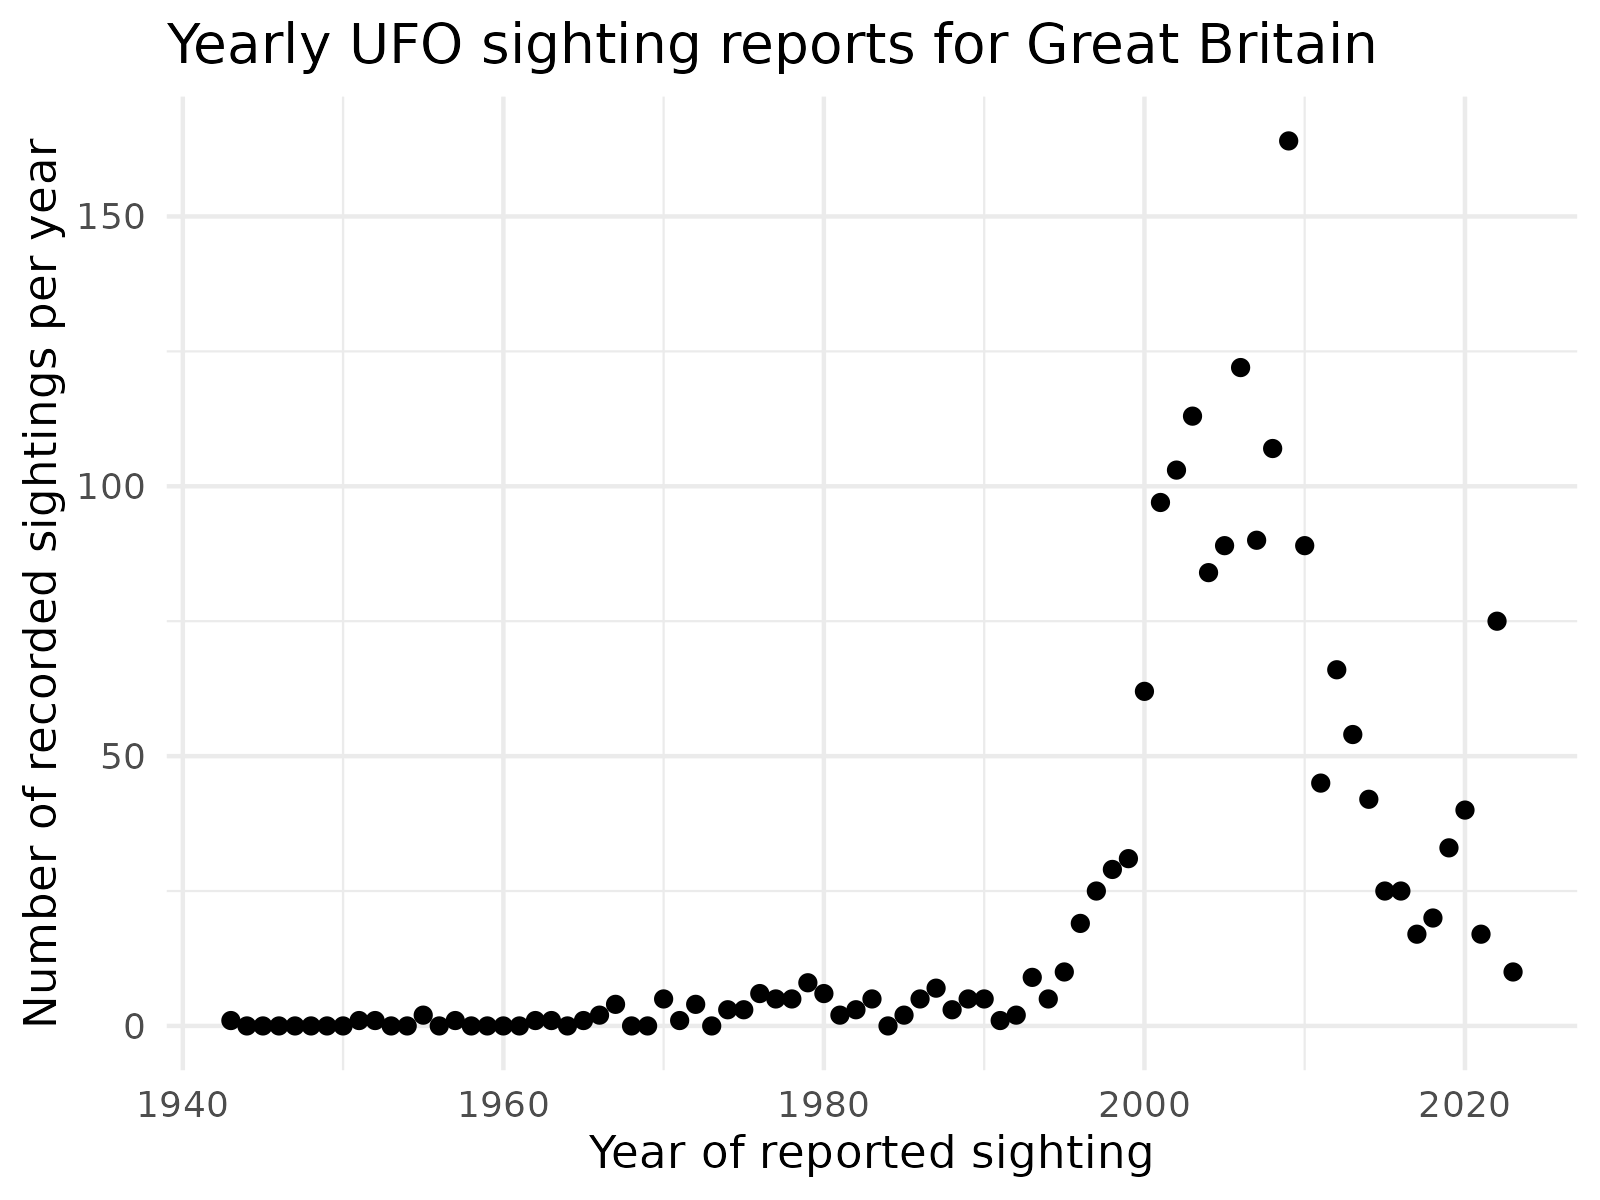 A scatter plot (time series) showing the number of reported UFO sightings (worldwide) from the year 1943 to 2023. Up until about 1990, the number of reports is small (usually under 10), and approximately constant. From the early 1990s, the number rises quickly to a peak of about 150 reports in 2009, as the counts increase, so does their scatter. The numbers then rapidly fall, with there being under 25 reports in 2022.